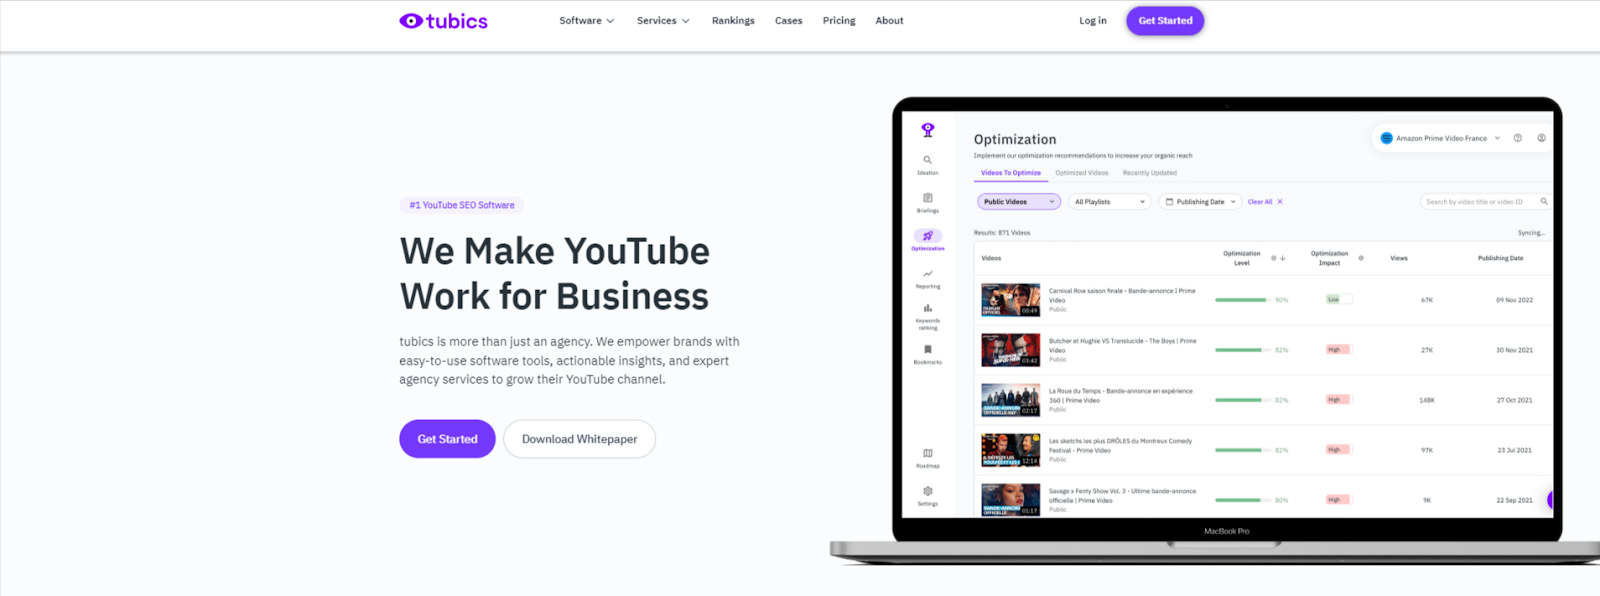 Tubics homepage featuring platform  YouTube monitoring solutions and pricing for business.